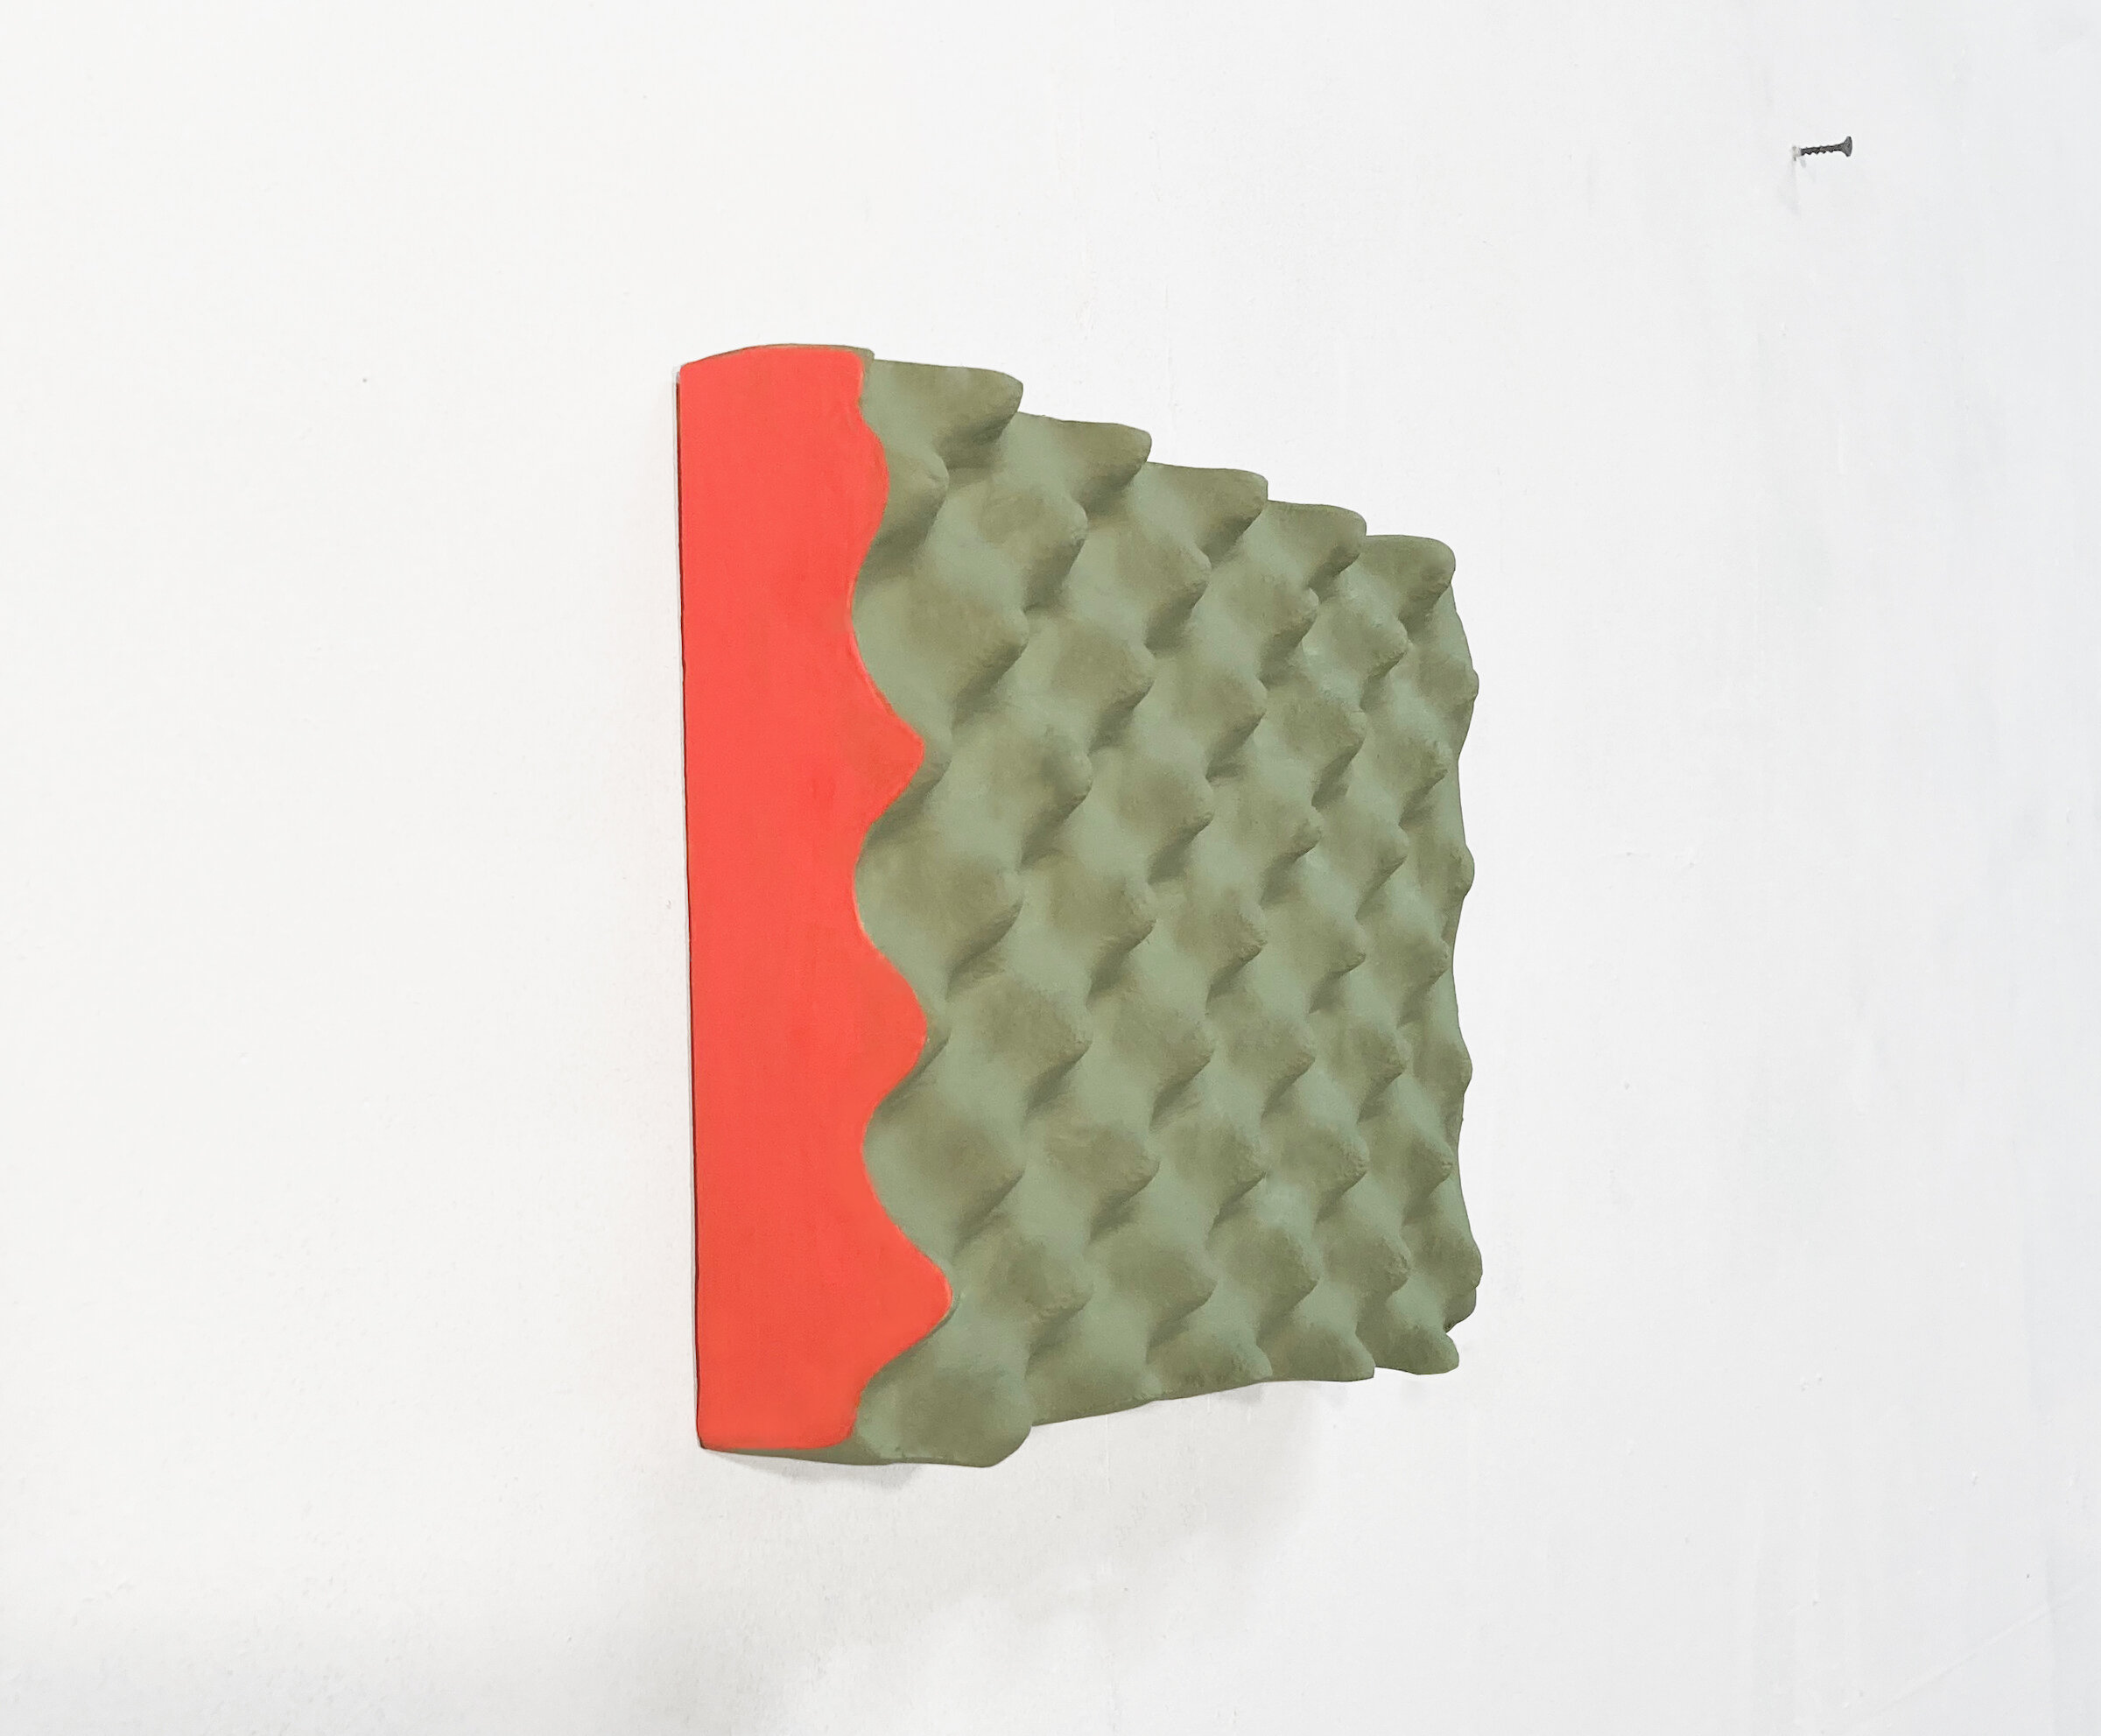  Giulia Piera Livi,  Untitled (green with coral),  2020. Mixed media, foam, flashe (with screw), 8 x 10 x 2 in.  1200.00 usd    